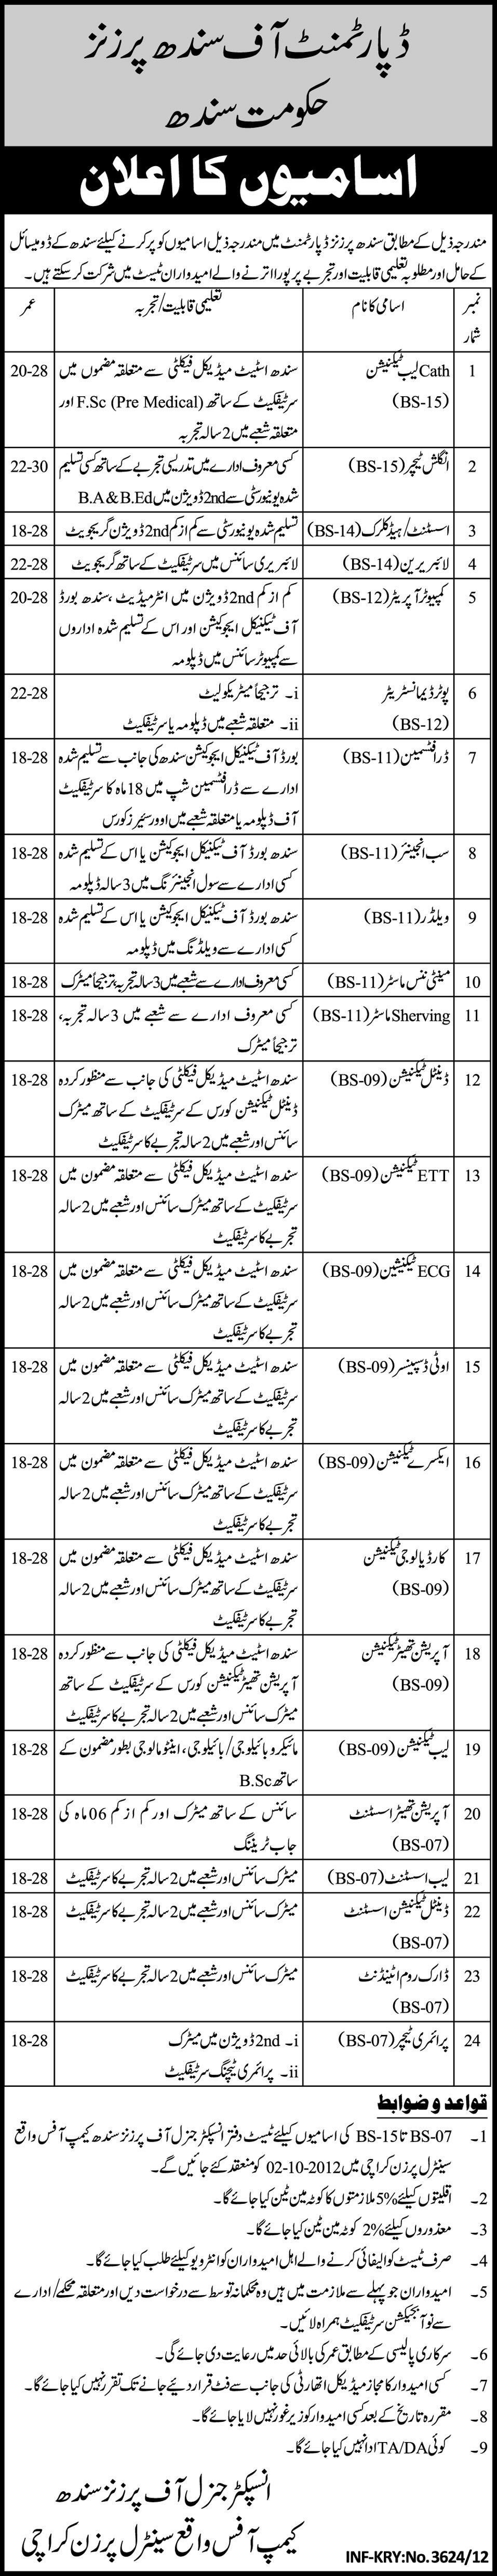 Sindh Prisons Department Requires Medical Technicians and Support Staff (Government Job)